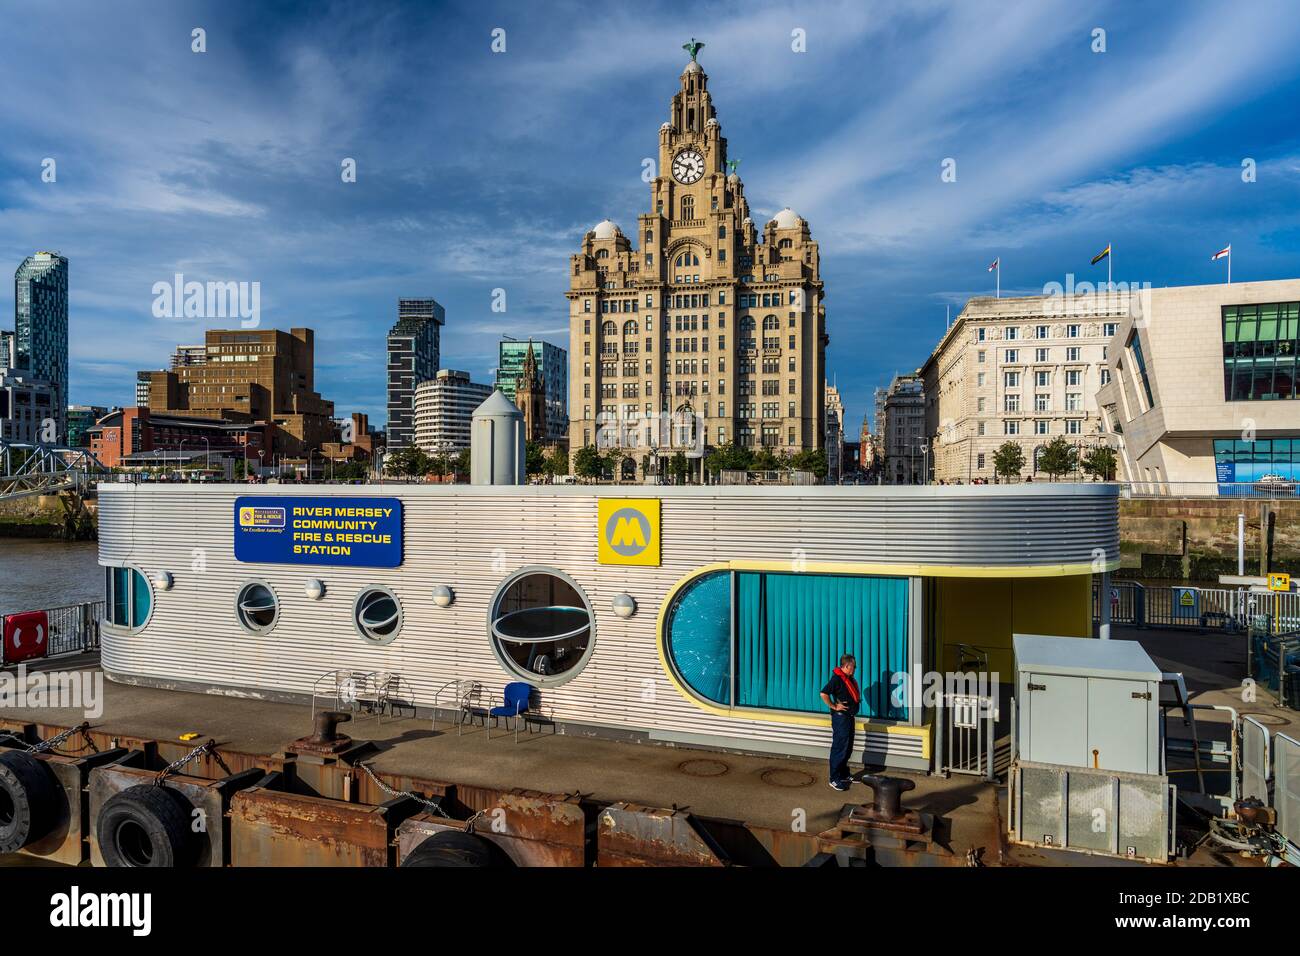 River Mersey Community Fire and Rescue Station Pier Head Liverpool - Liverpool Fire and Rescue Service river station. Liverpool Marine Rescue Unit. Stock Photo